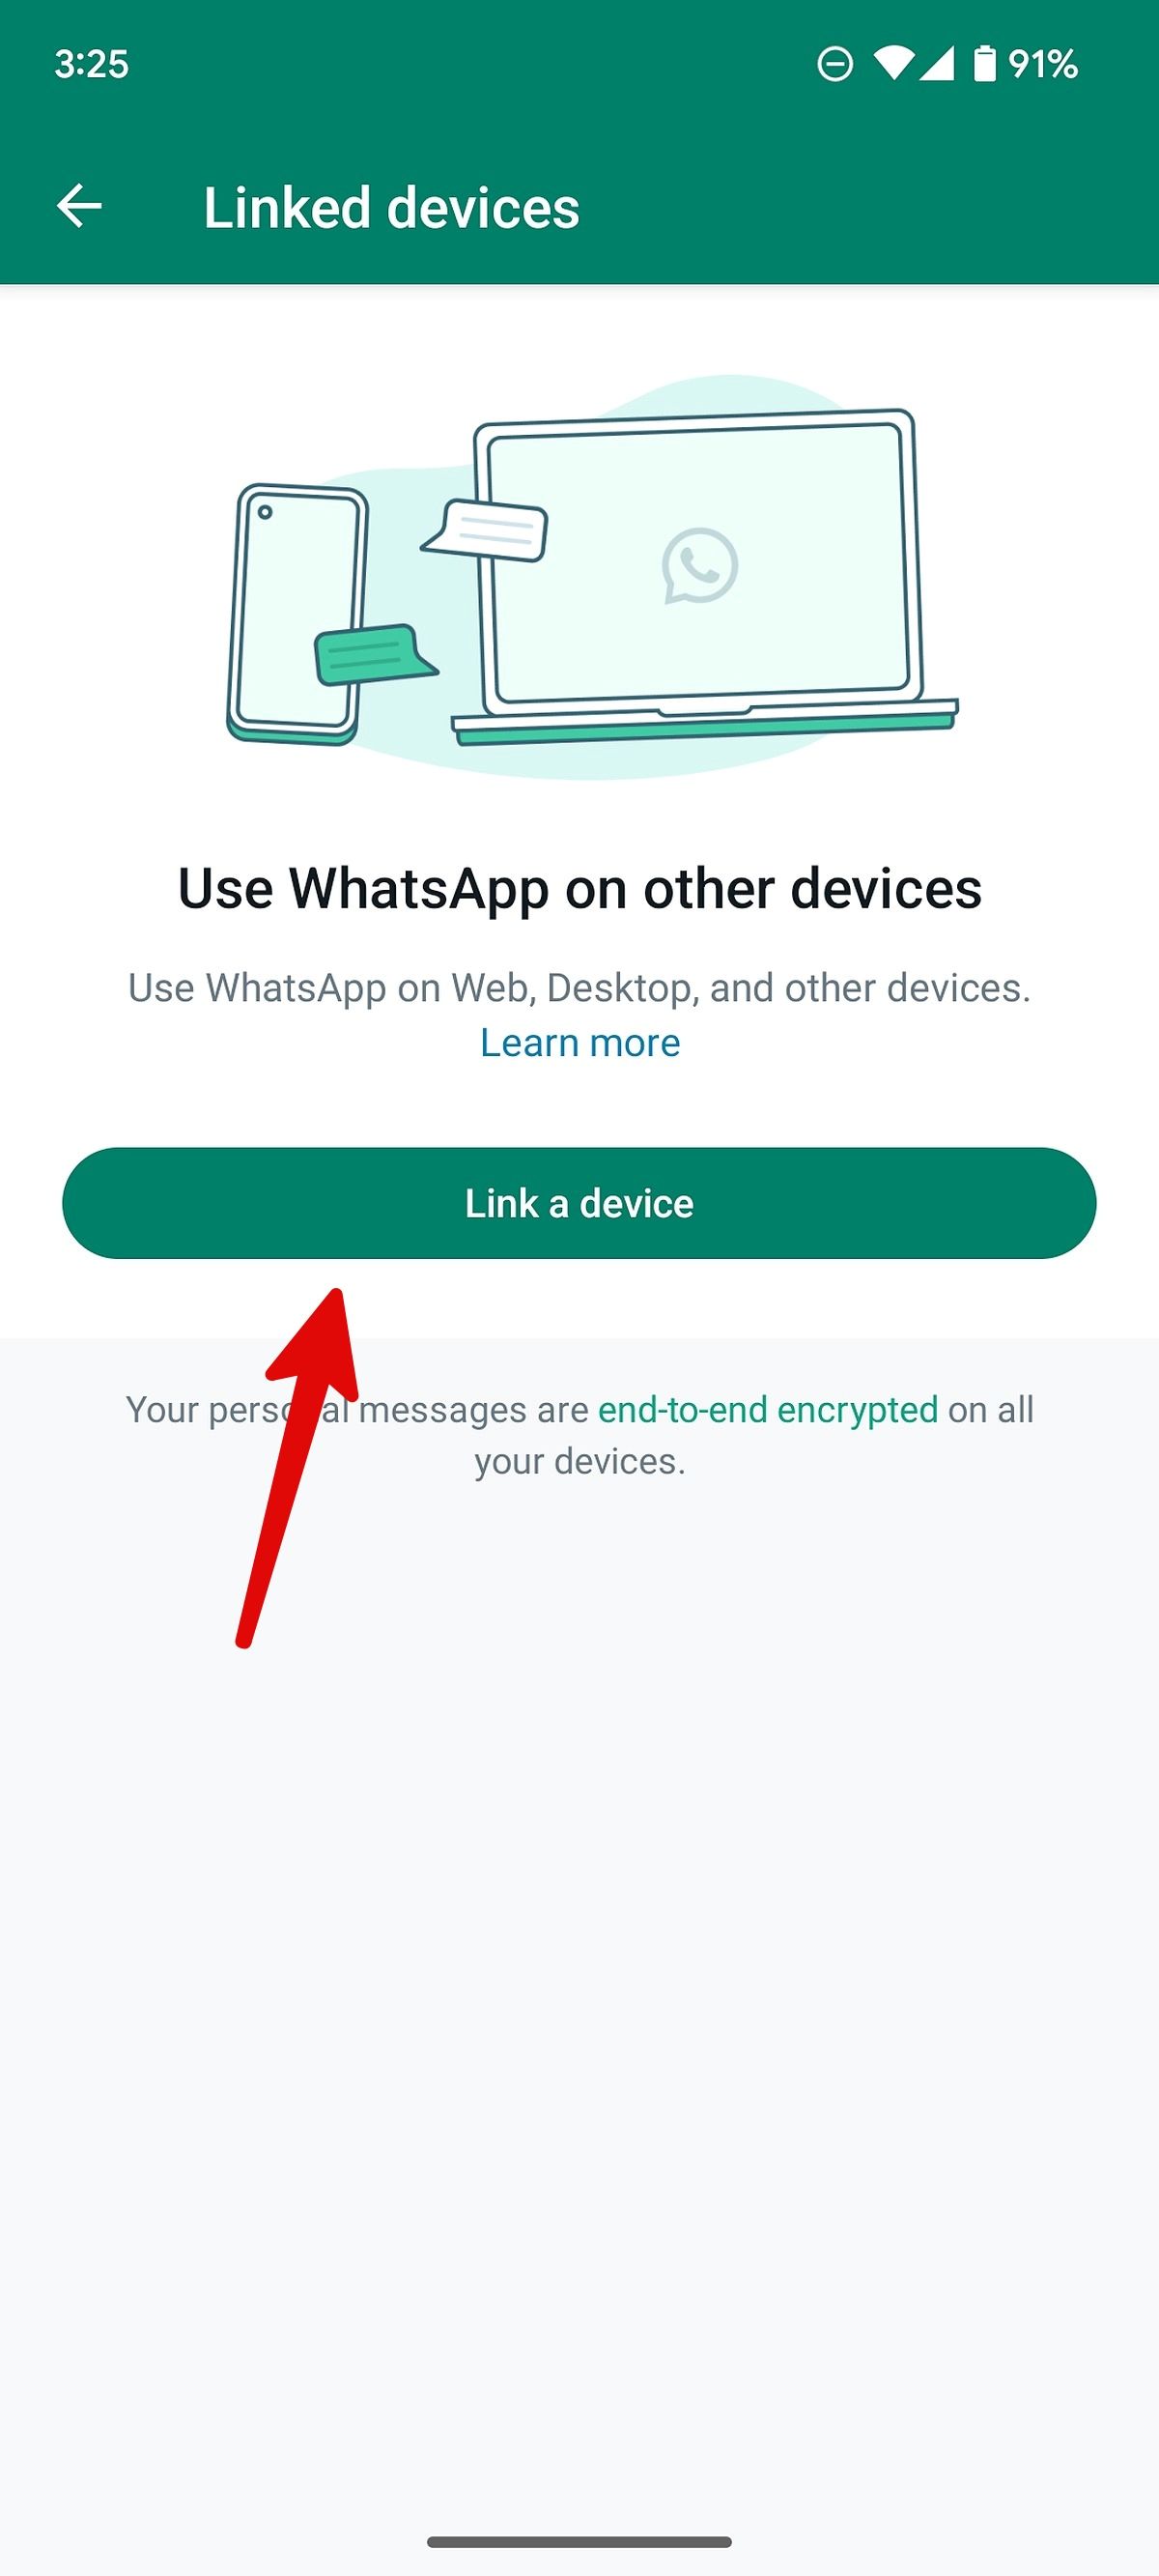 link a device on WhatsApp